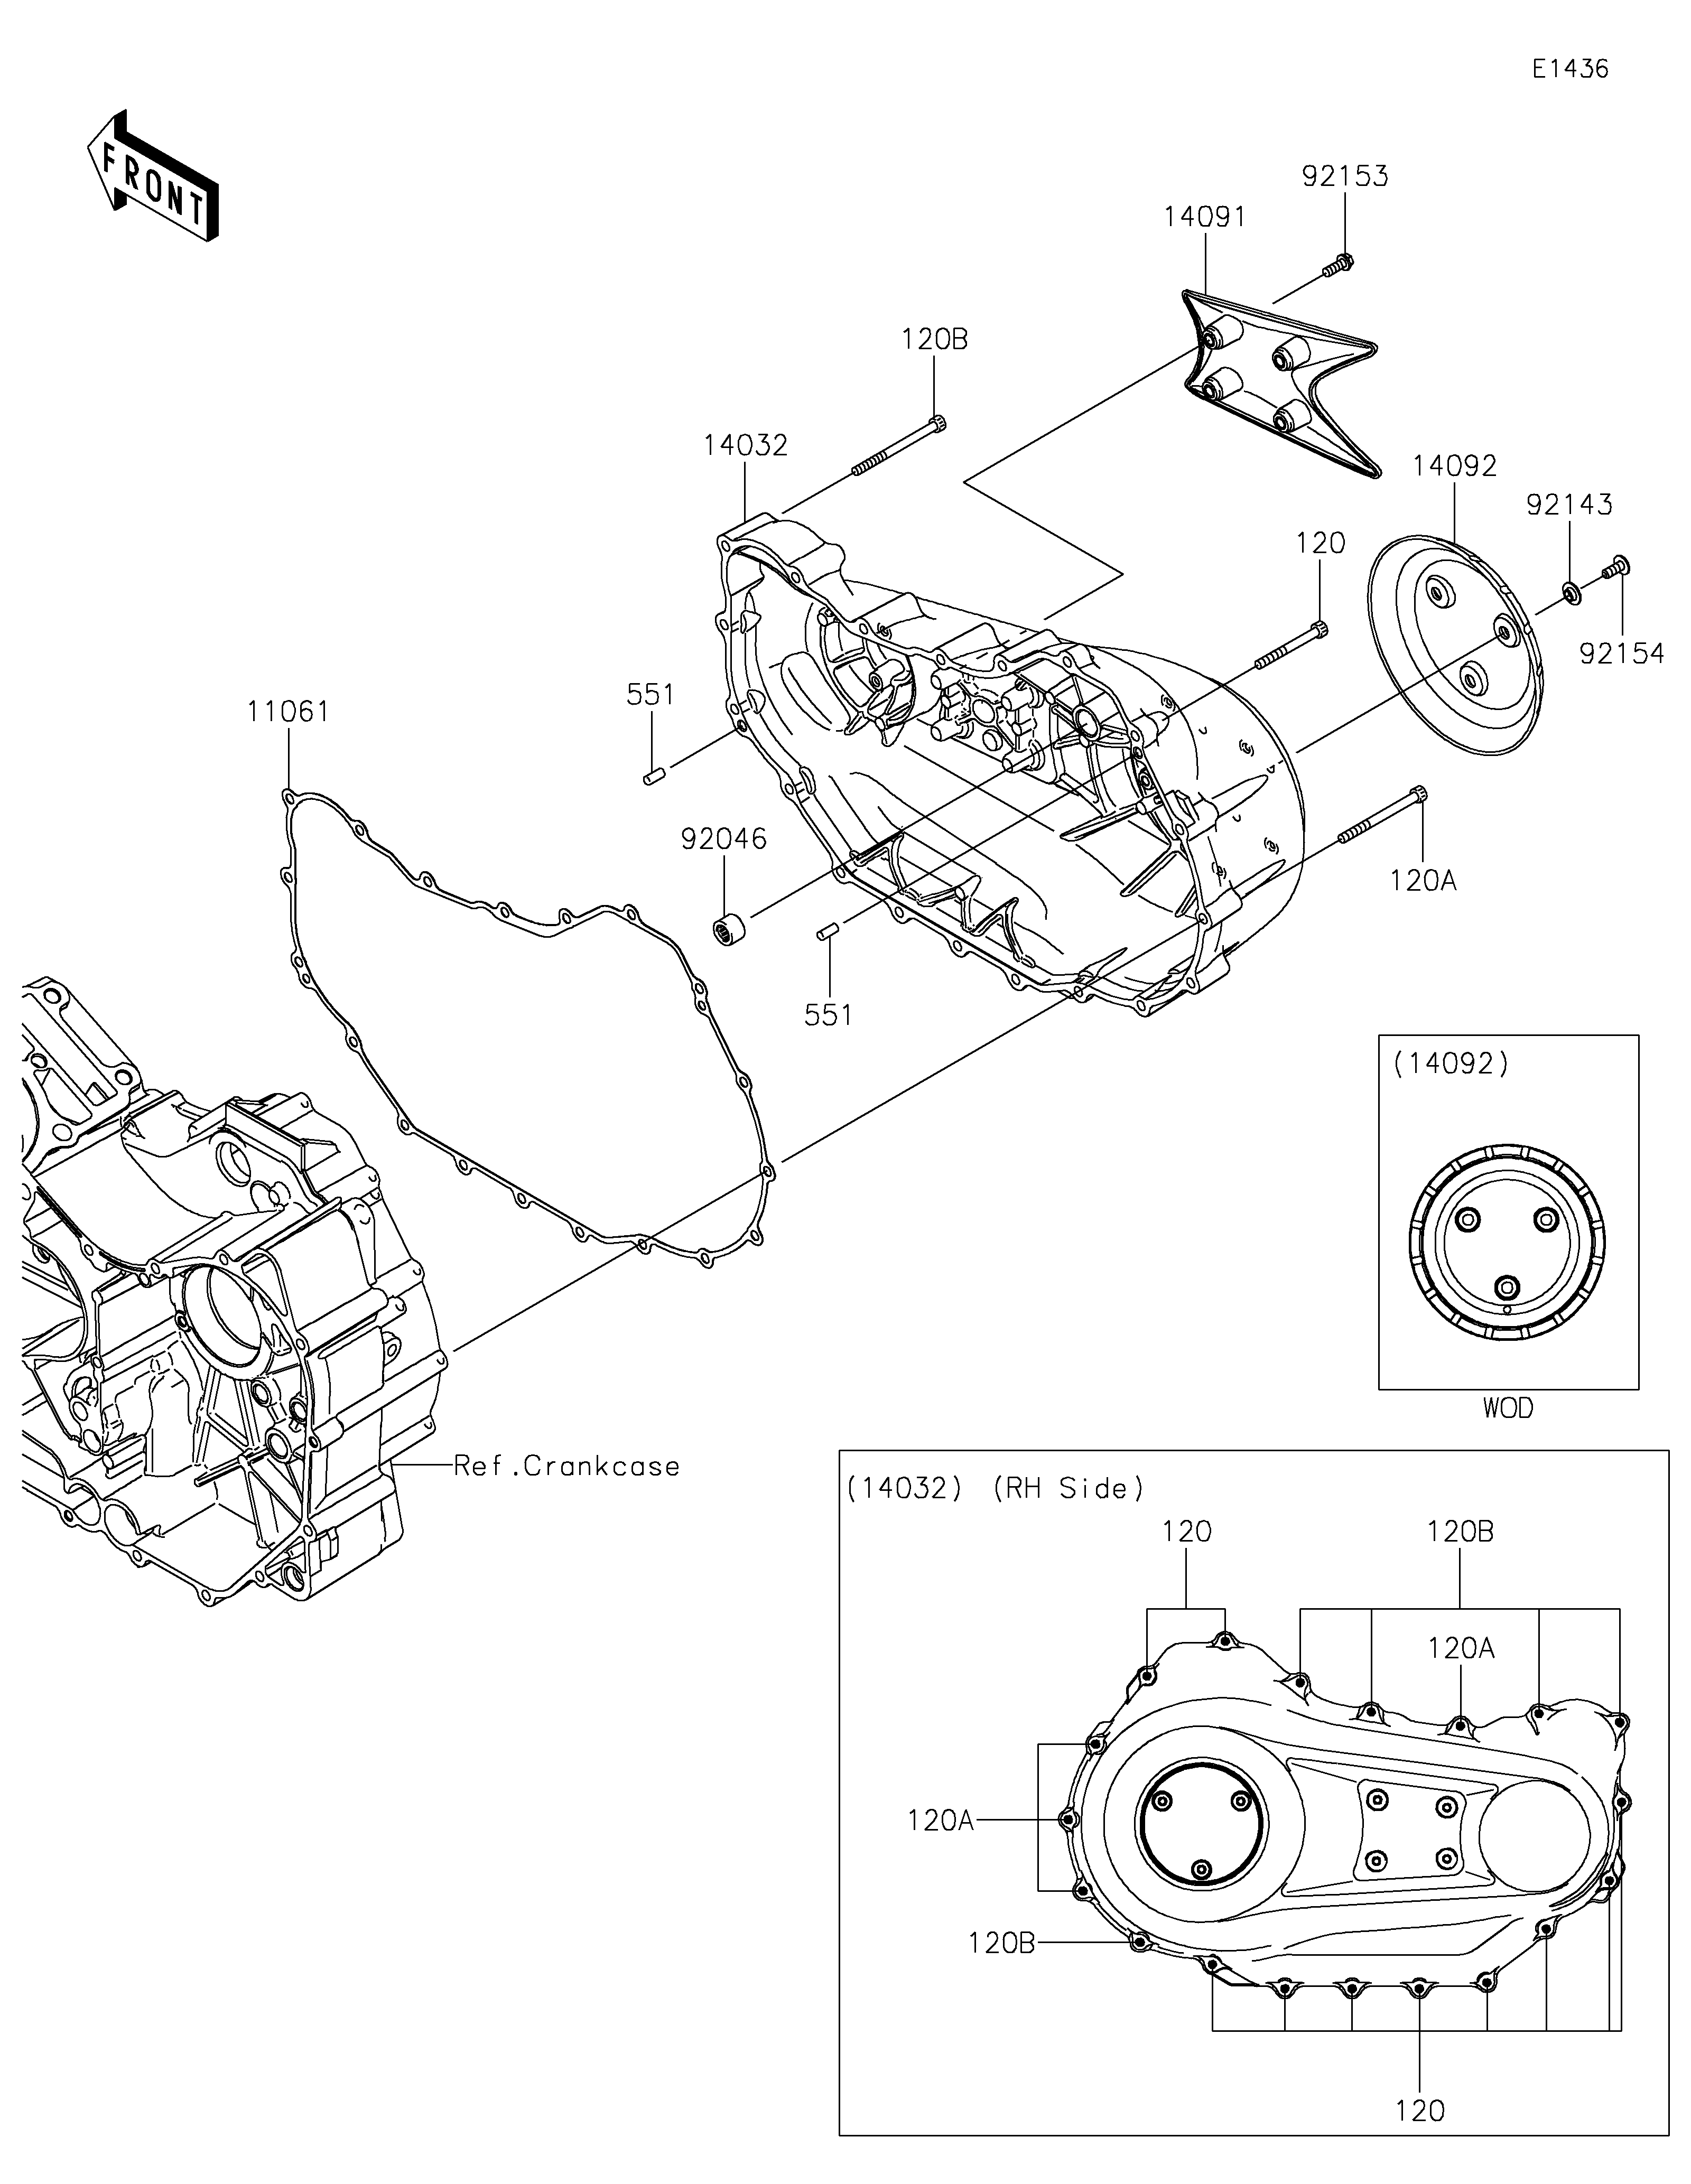 Right Engine Cover(s)